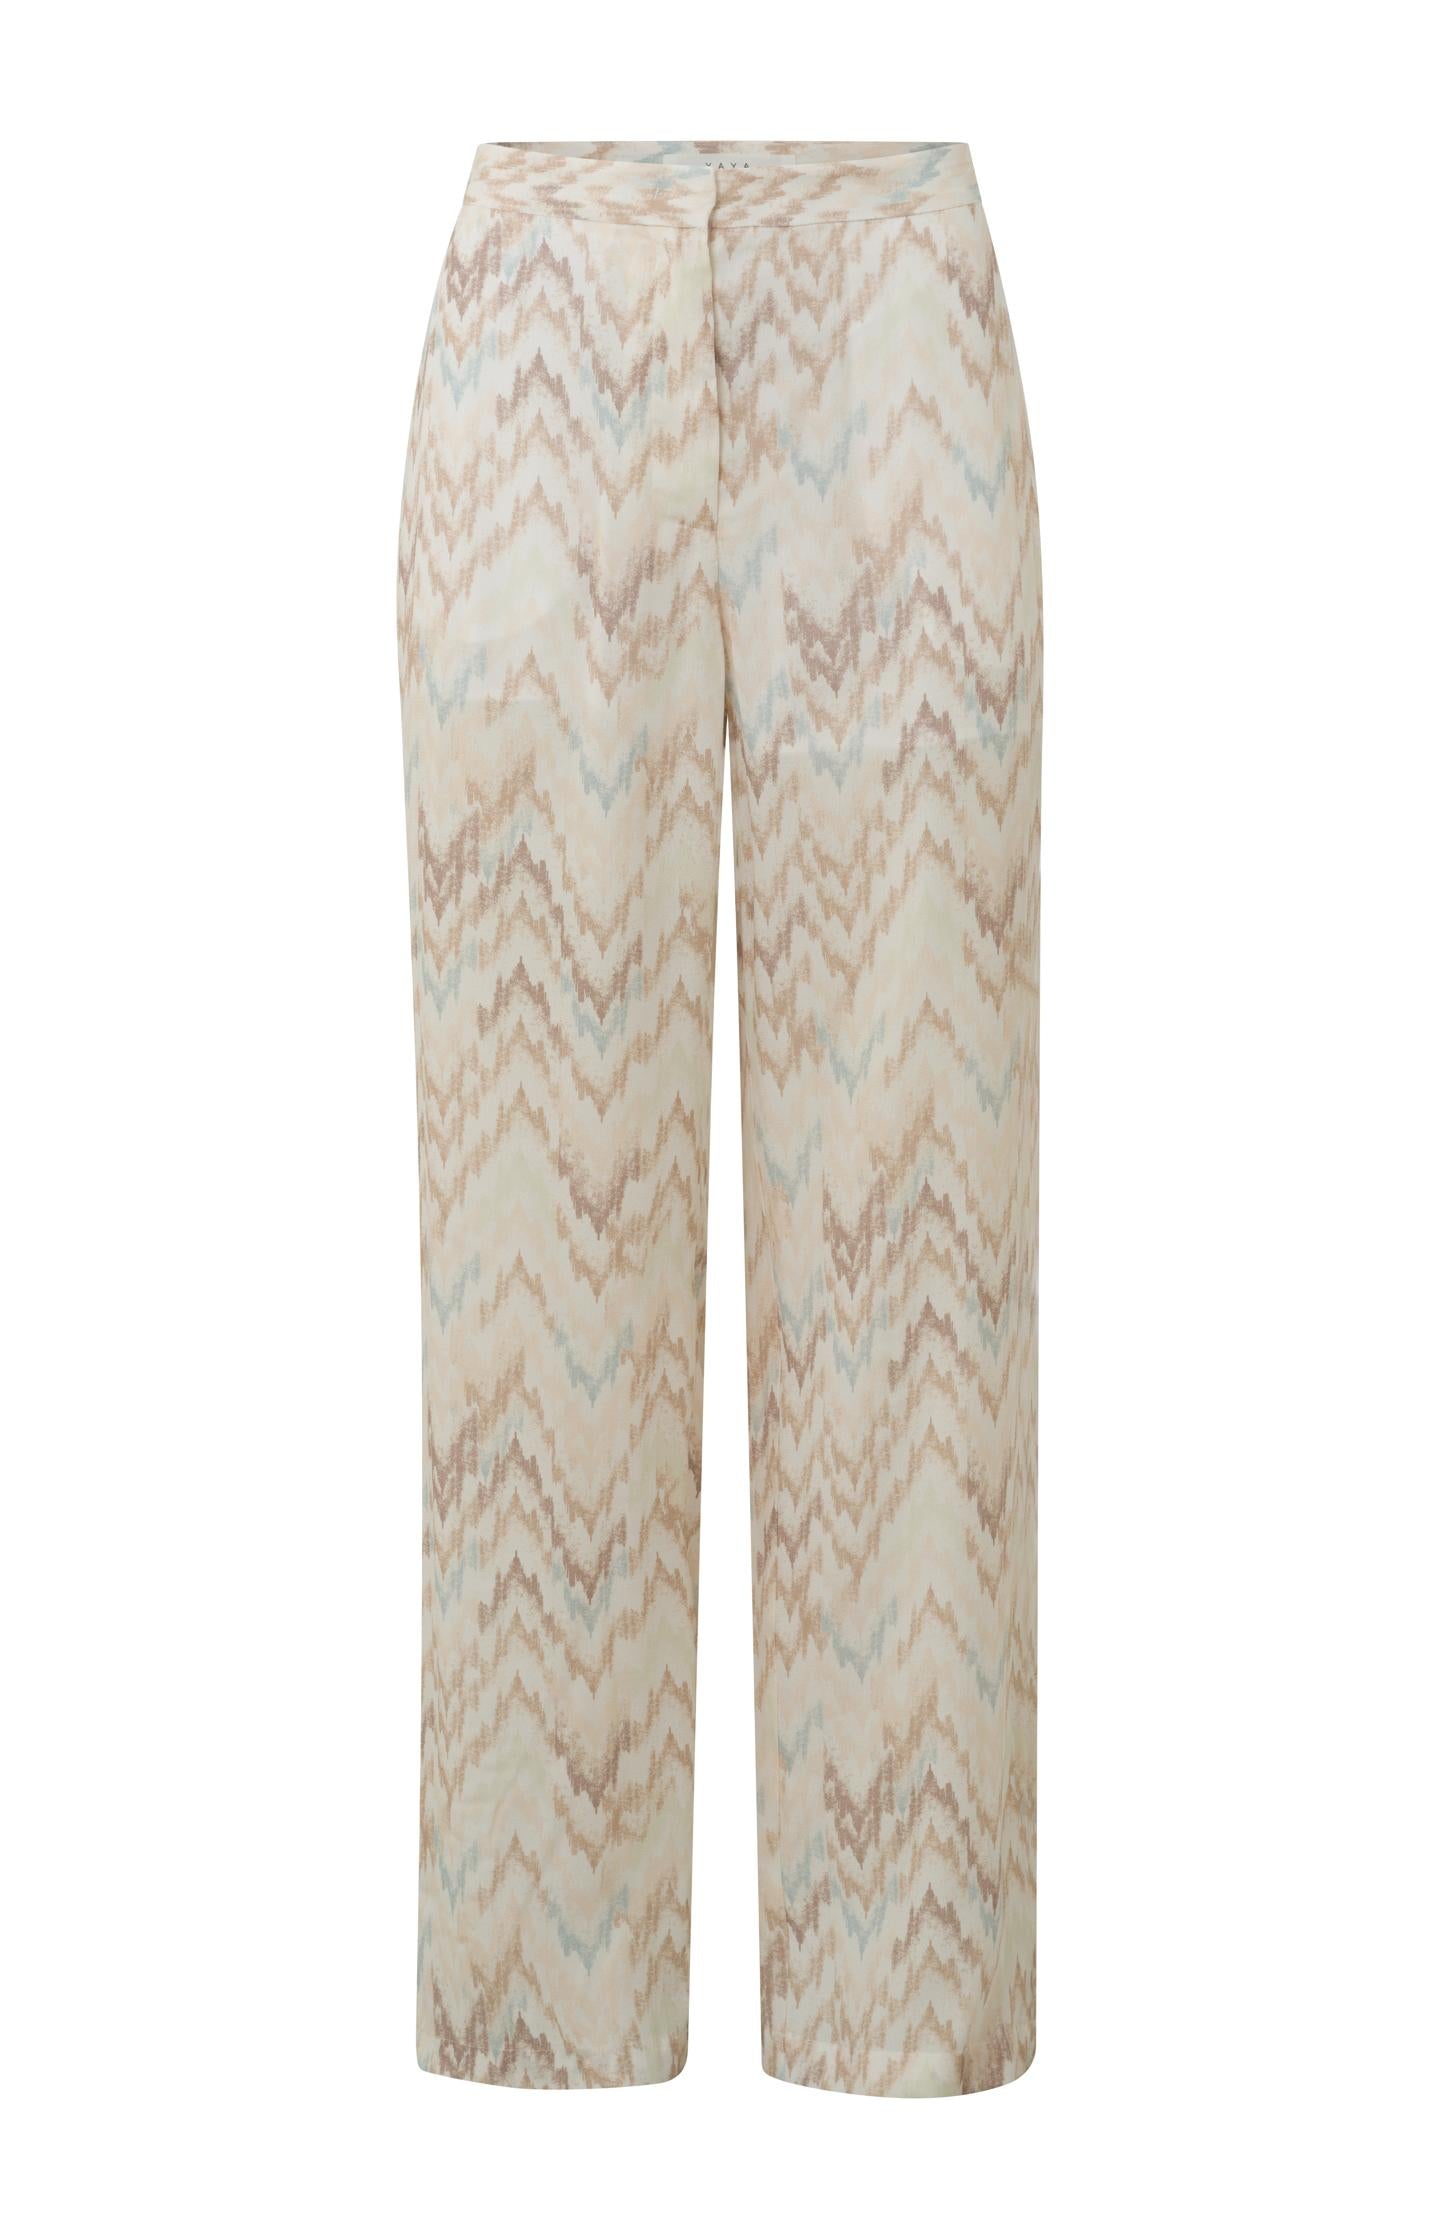 Wide leg trousers with side pockets, zip fly and print - Type: product